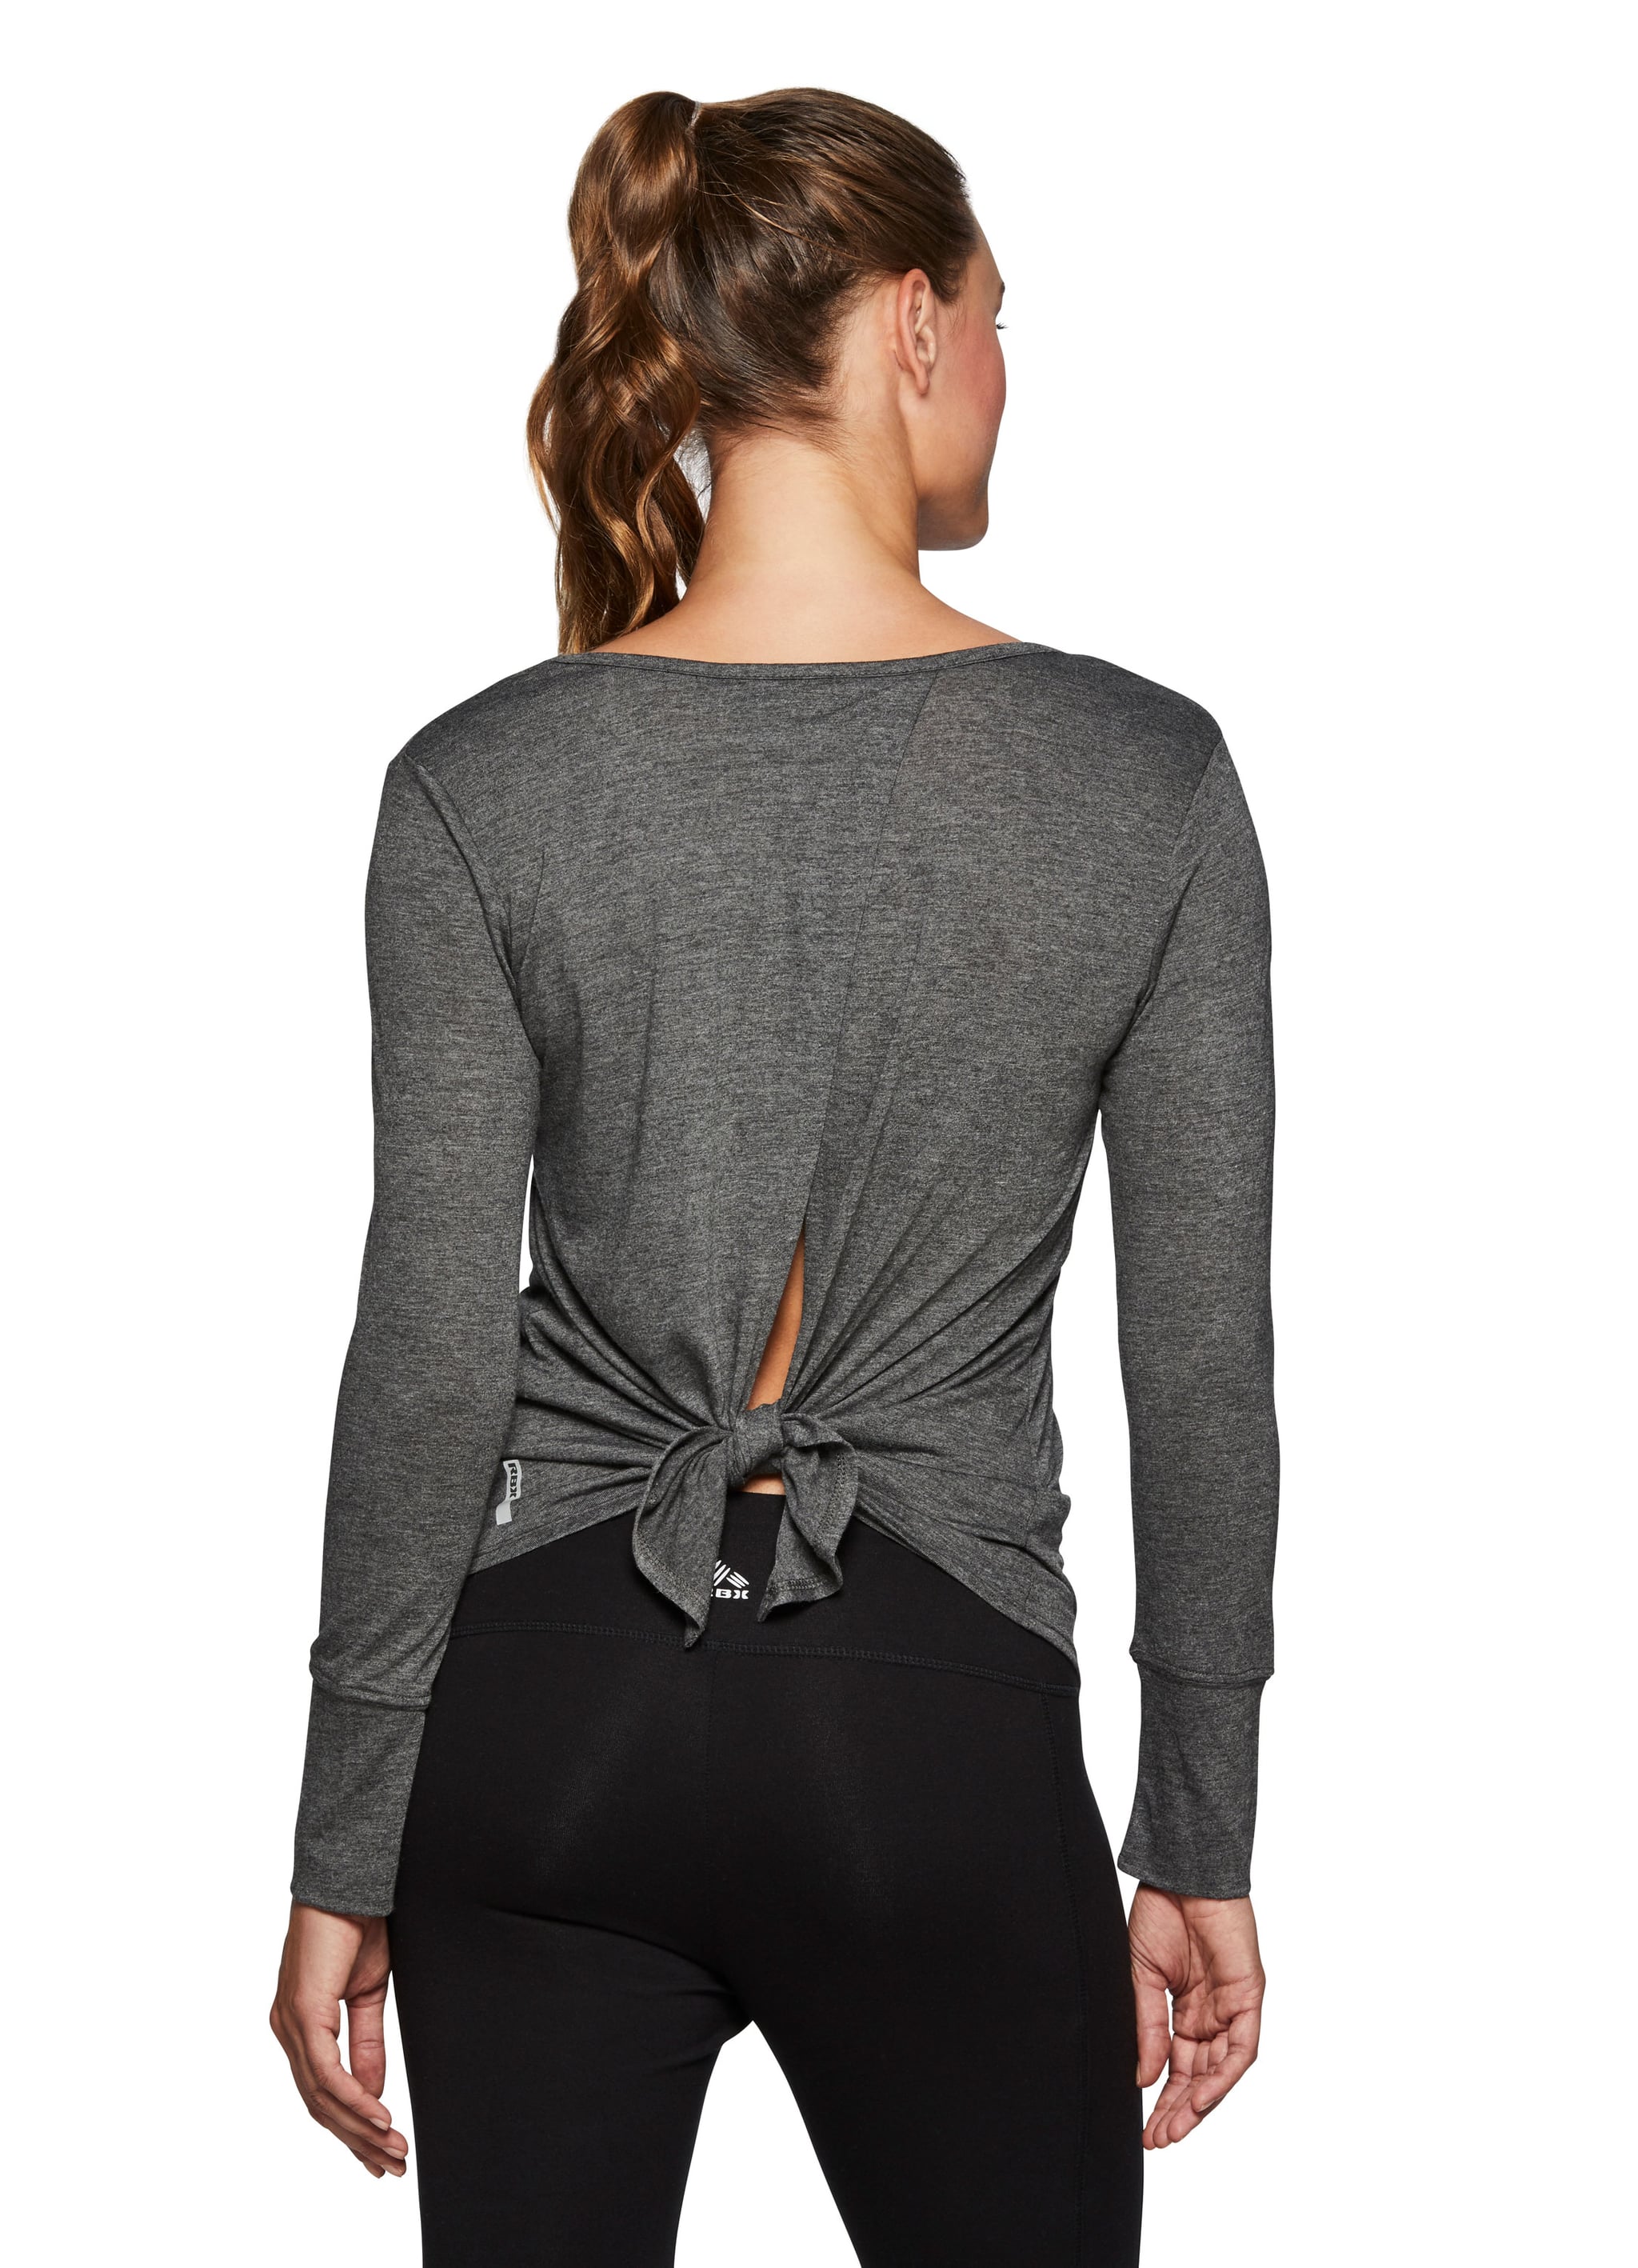 Mippo Sexy Long Sleeve Workout Yoga Shirts for Women | Open Back Tops with  Cross Knot Design